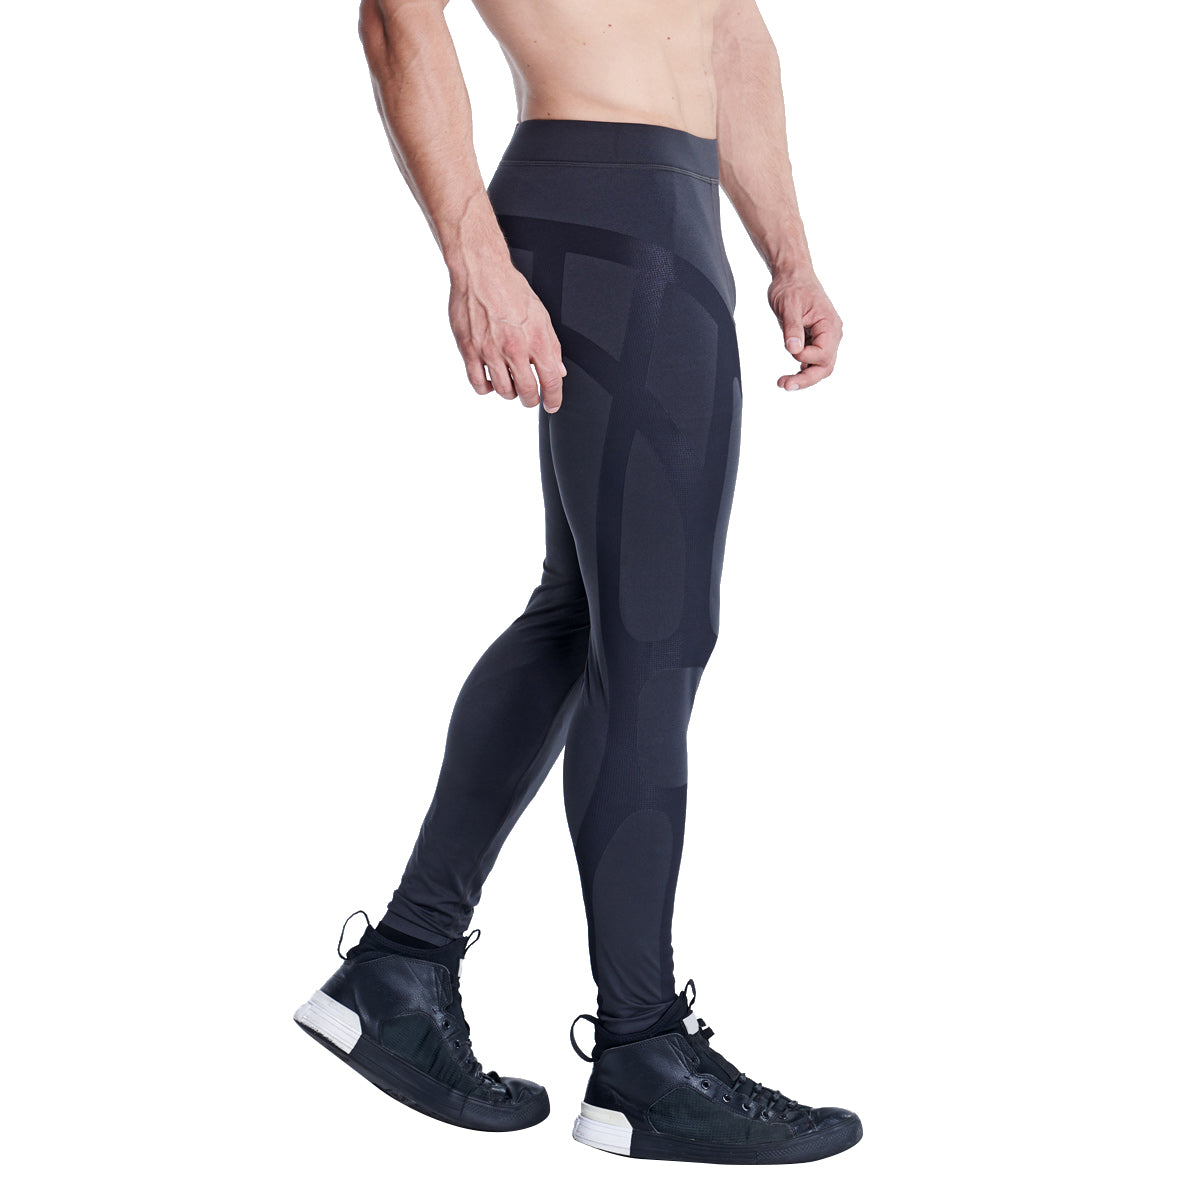 Supportive Compression Leggings for Men | Gym Aesthetics